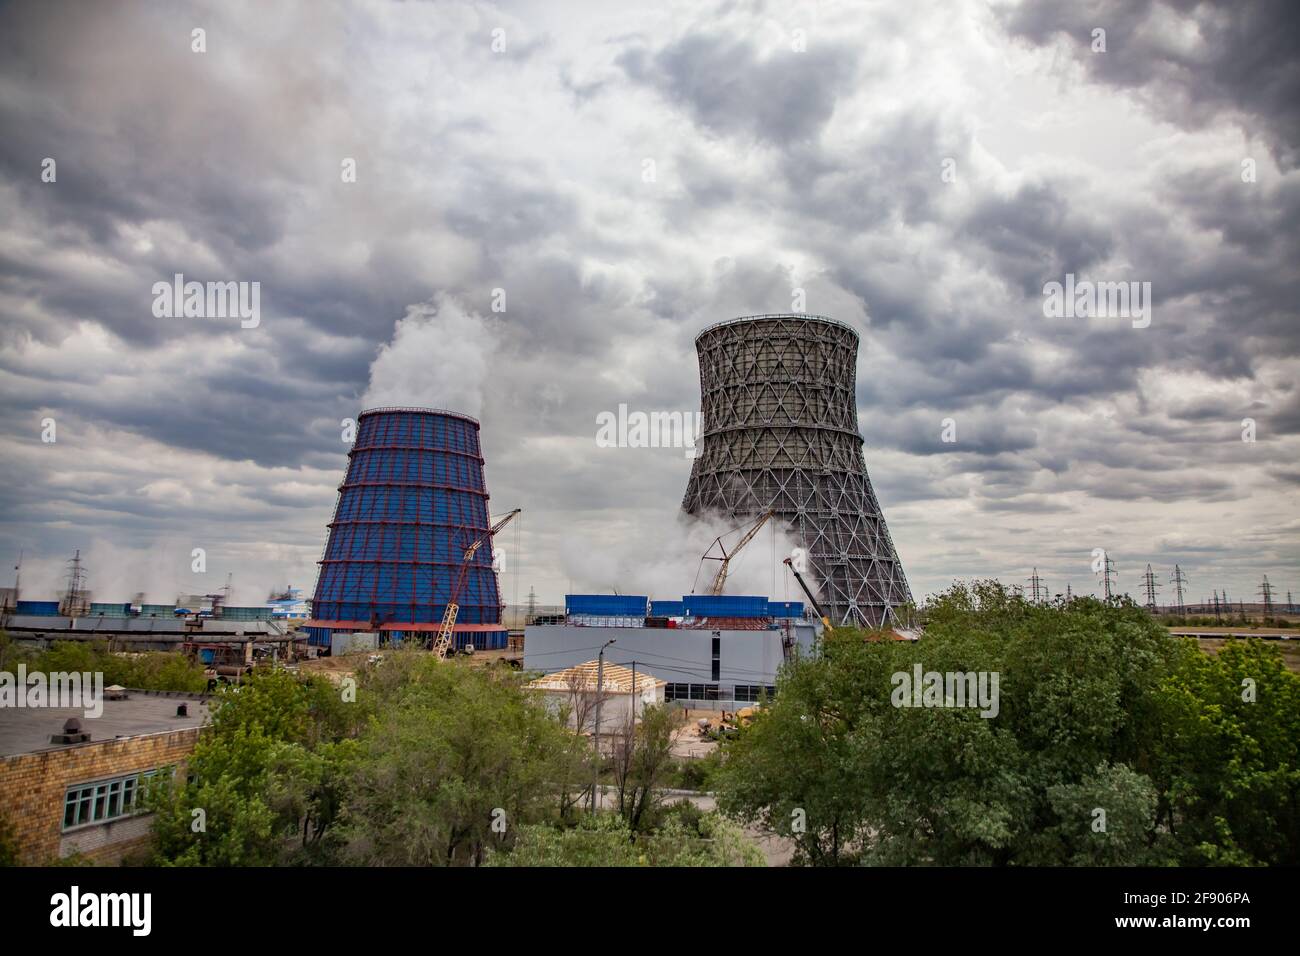 Heat electric plant panoramic view. Cooling towers on background. Green trees. Yellow mobile cranes, grey cloudy sky. Karaganda, Kazakhstan. Stock Photo